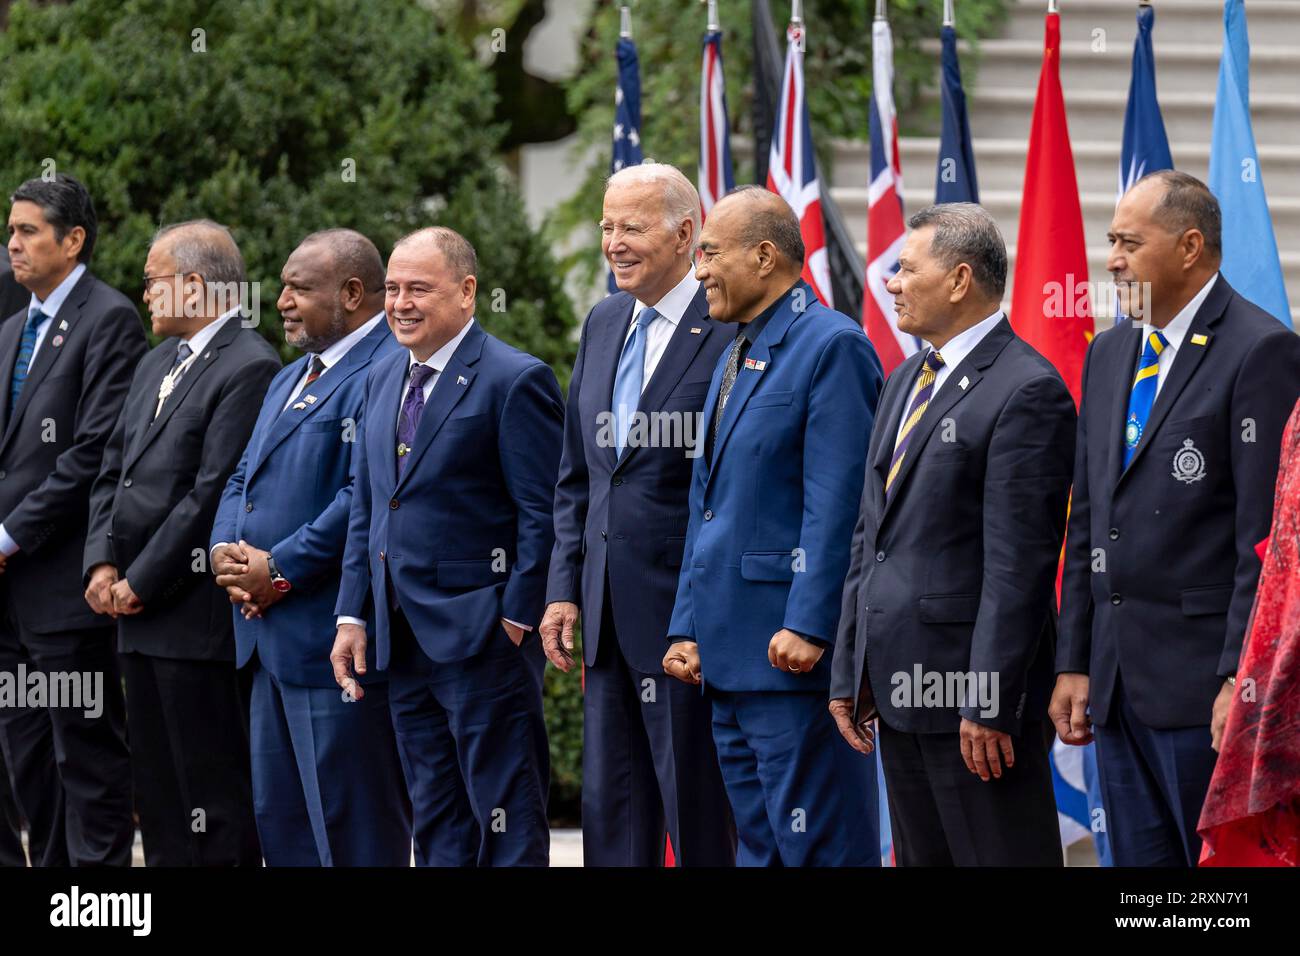 Washington, United States. 25th Sep, 2023. U.S President Joe Biden, center, poses with the Pacific Islands Forum leaders during the 2nd Summit meeting at the White House, September 25, 2023, in Washington, DC From left, Palau President Surangel Whipps Jr., Marshall Islands President David Kabua, Papua New Guinean Prime Minister James Marape, Cook Islands Prime Minister Mark Brown, U.S. President Joe Biden, Kiribati President Taneti Maamau, Tuvaluan Prime Minister Kausea Natano, and Premier of Niue Dalton Tagelagi. Credit: Adam Schultz/White House Photo/Alamy Live News Stock Photo